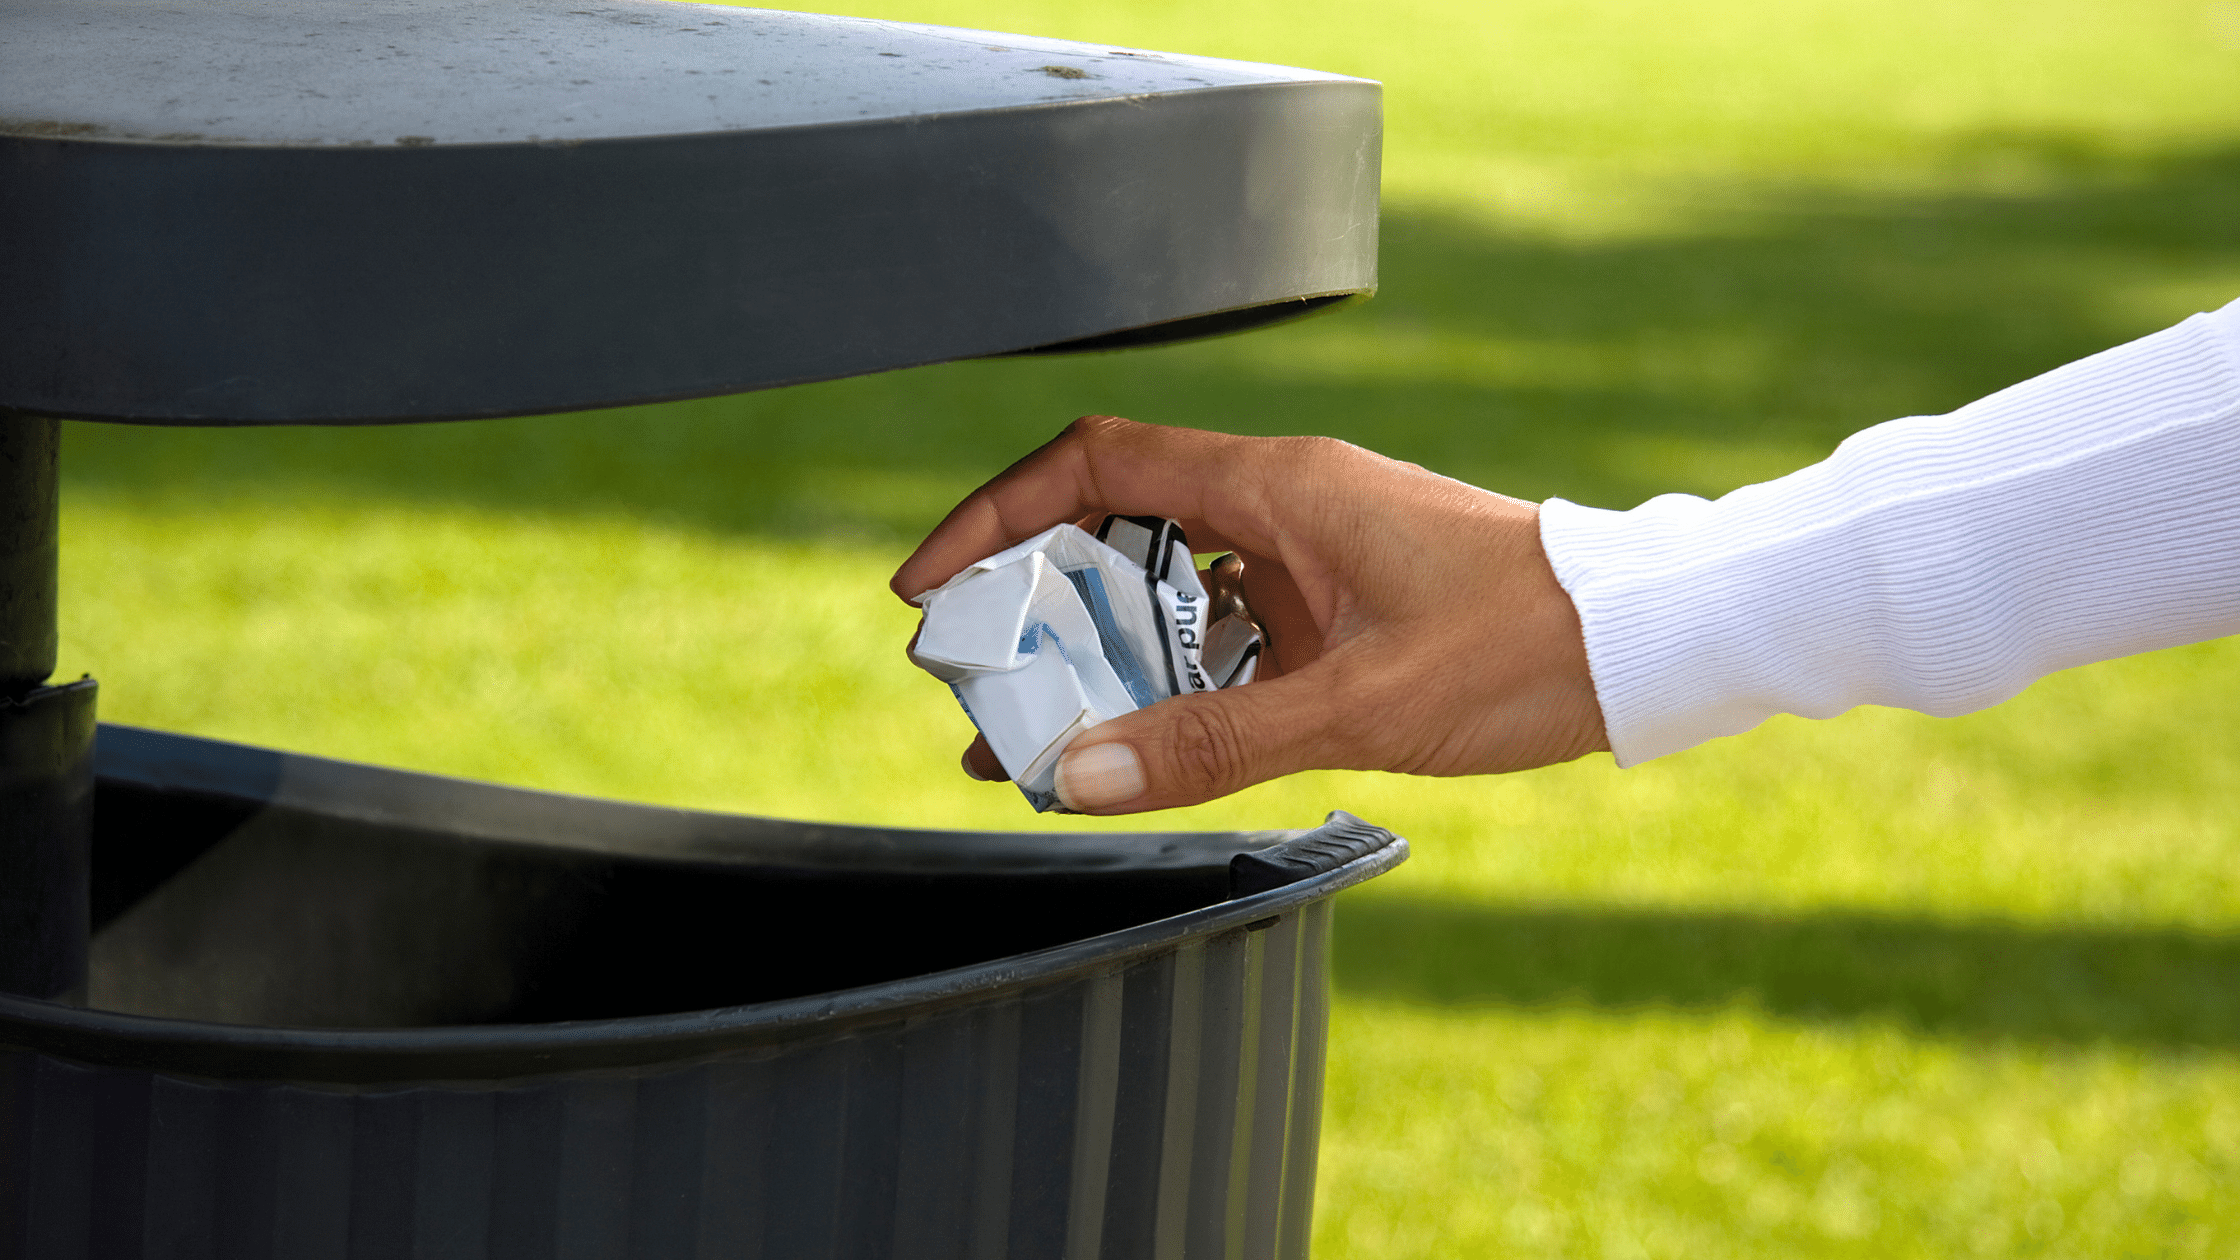 image showing a waste bin and a hand about to throw a ball of paper into the bin opening